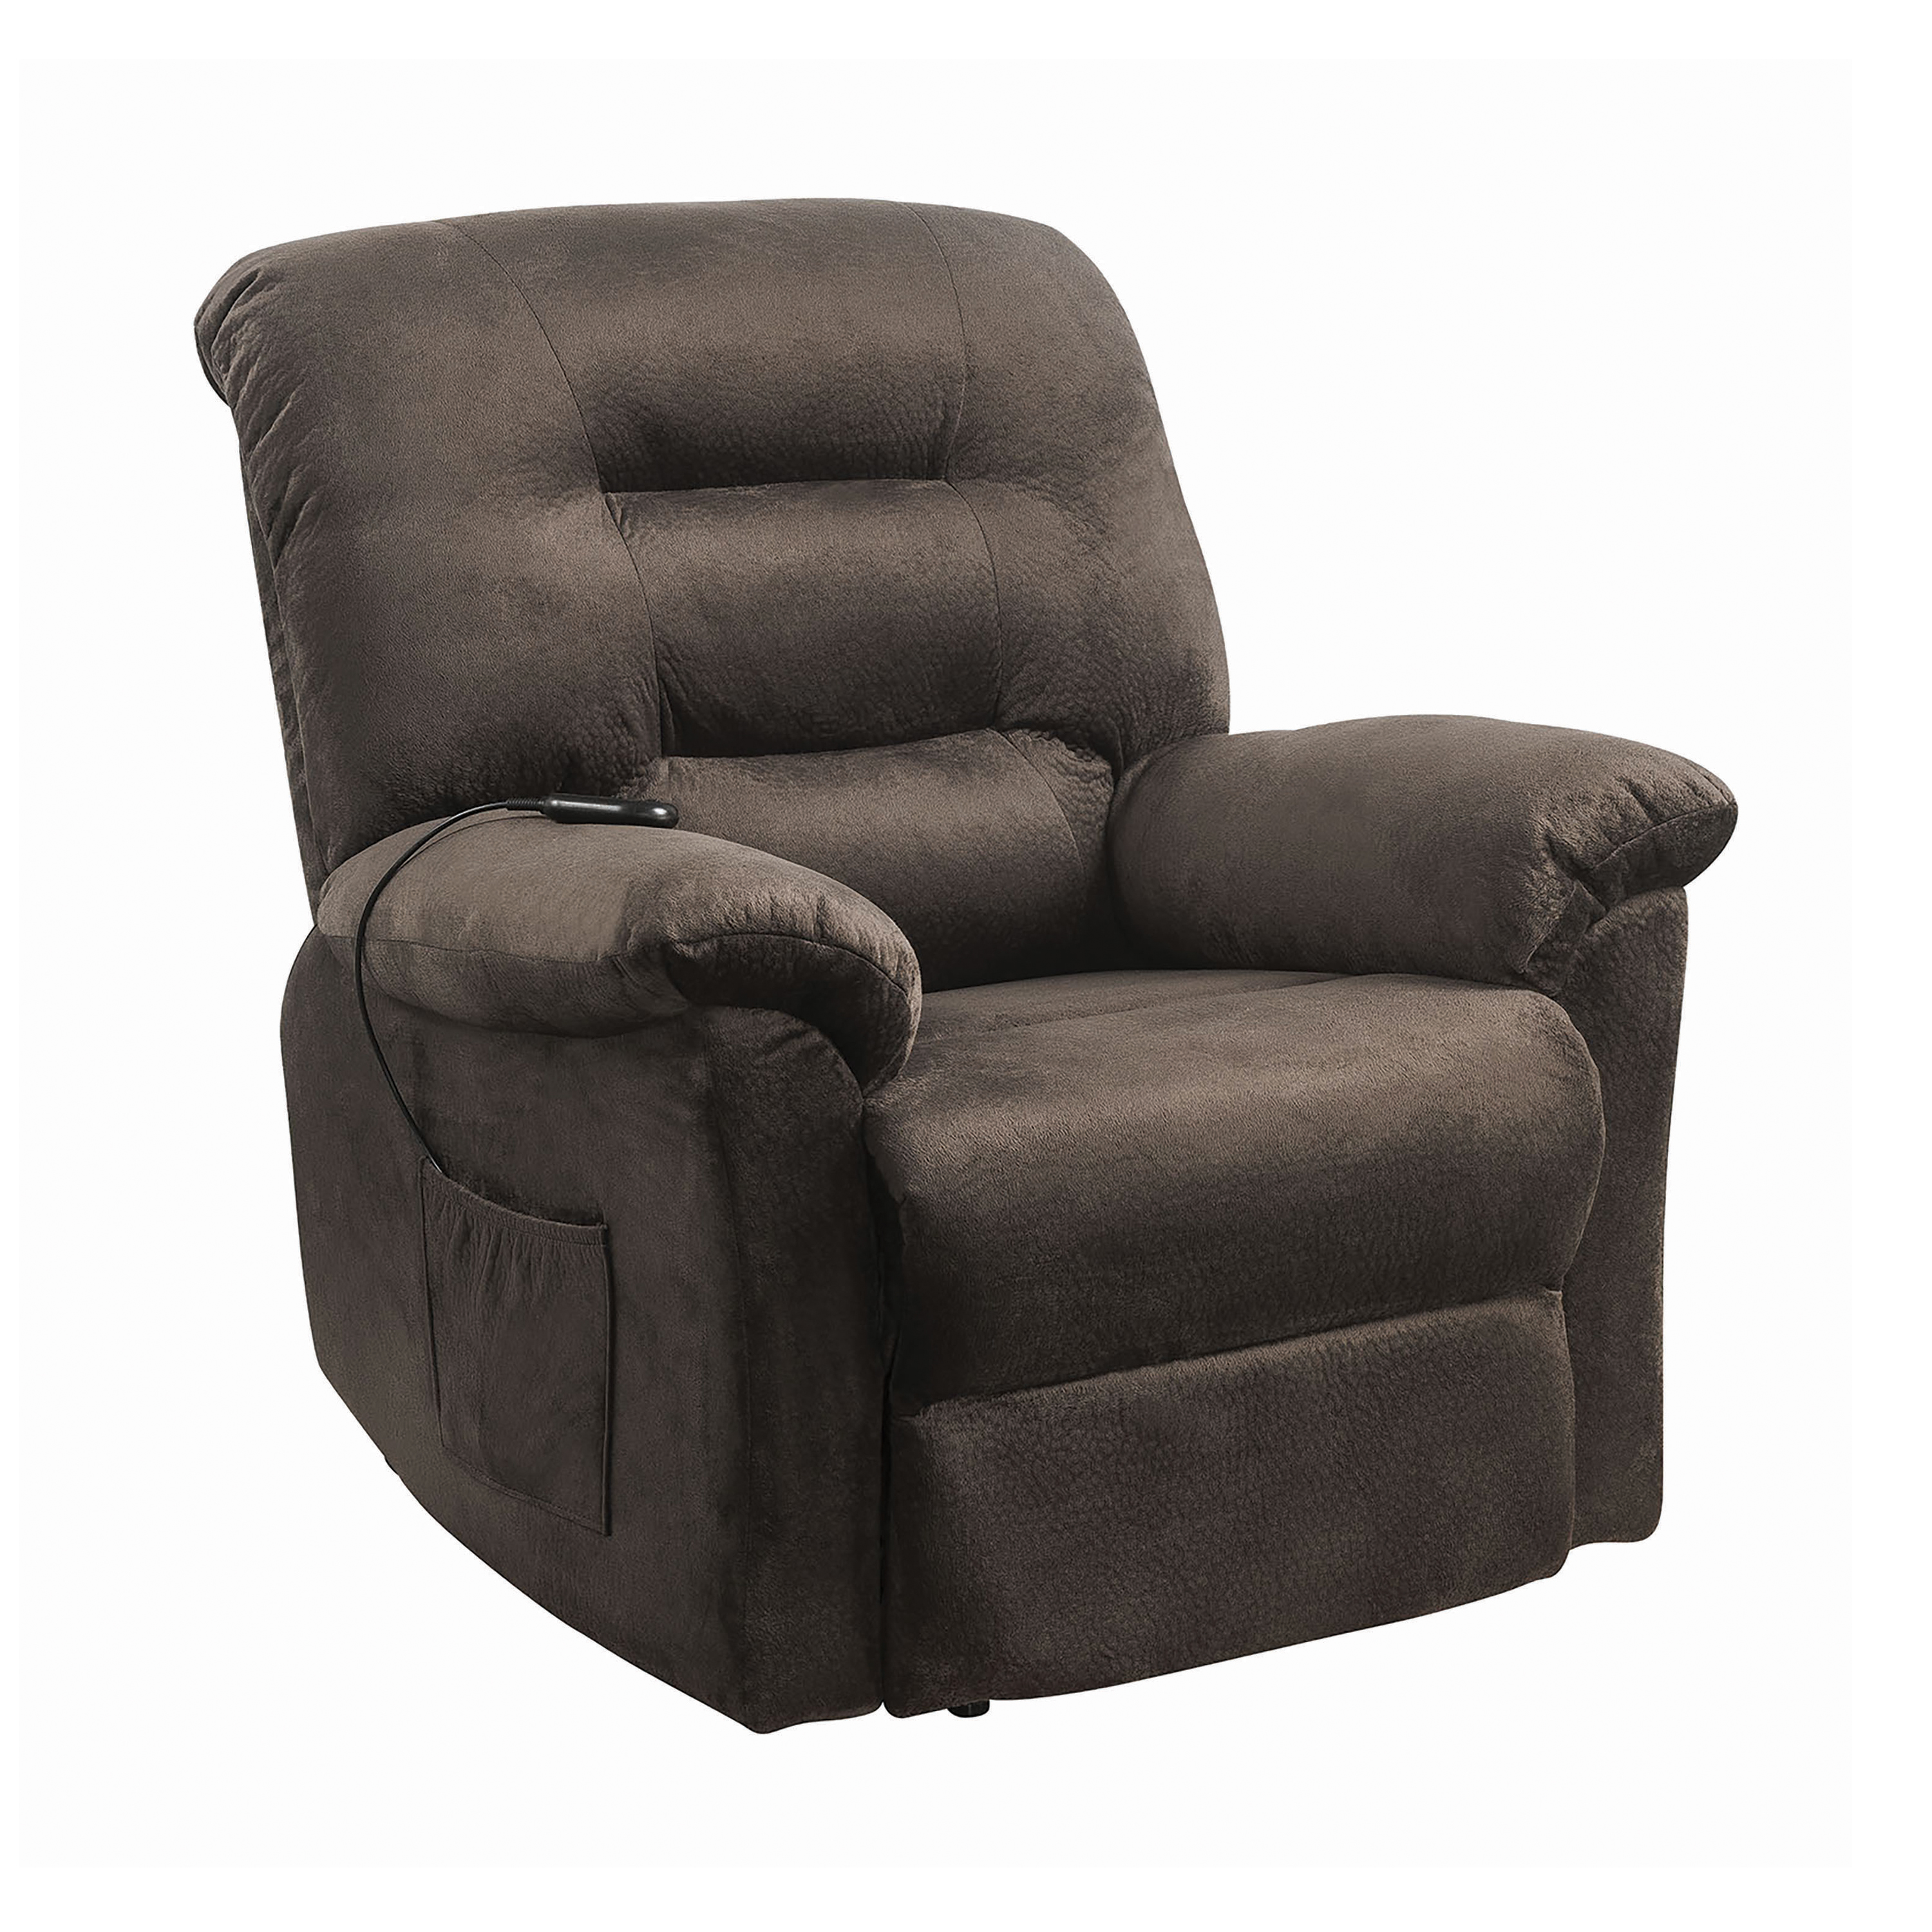 Coaster Company Power Lift Recliner, Chocolate - image 1 of 3